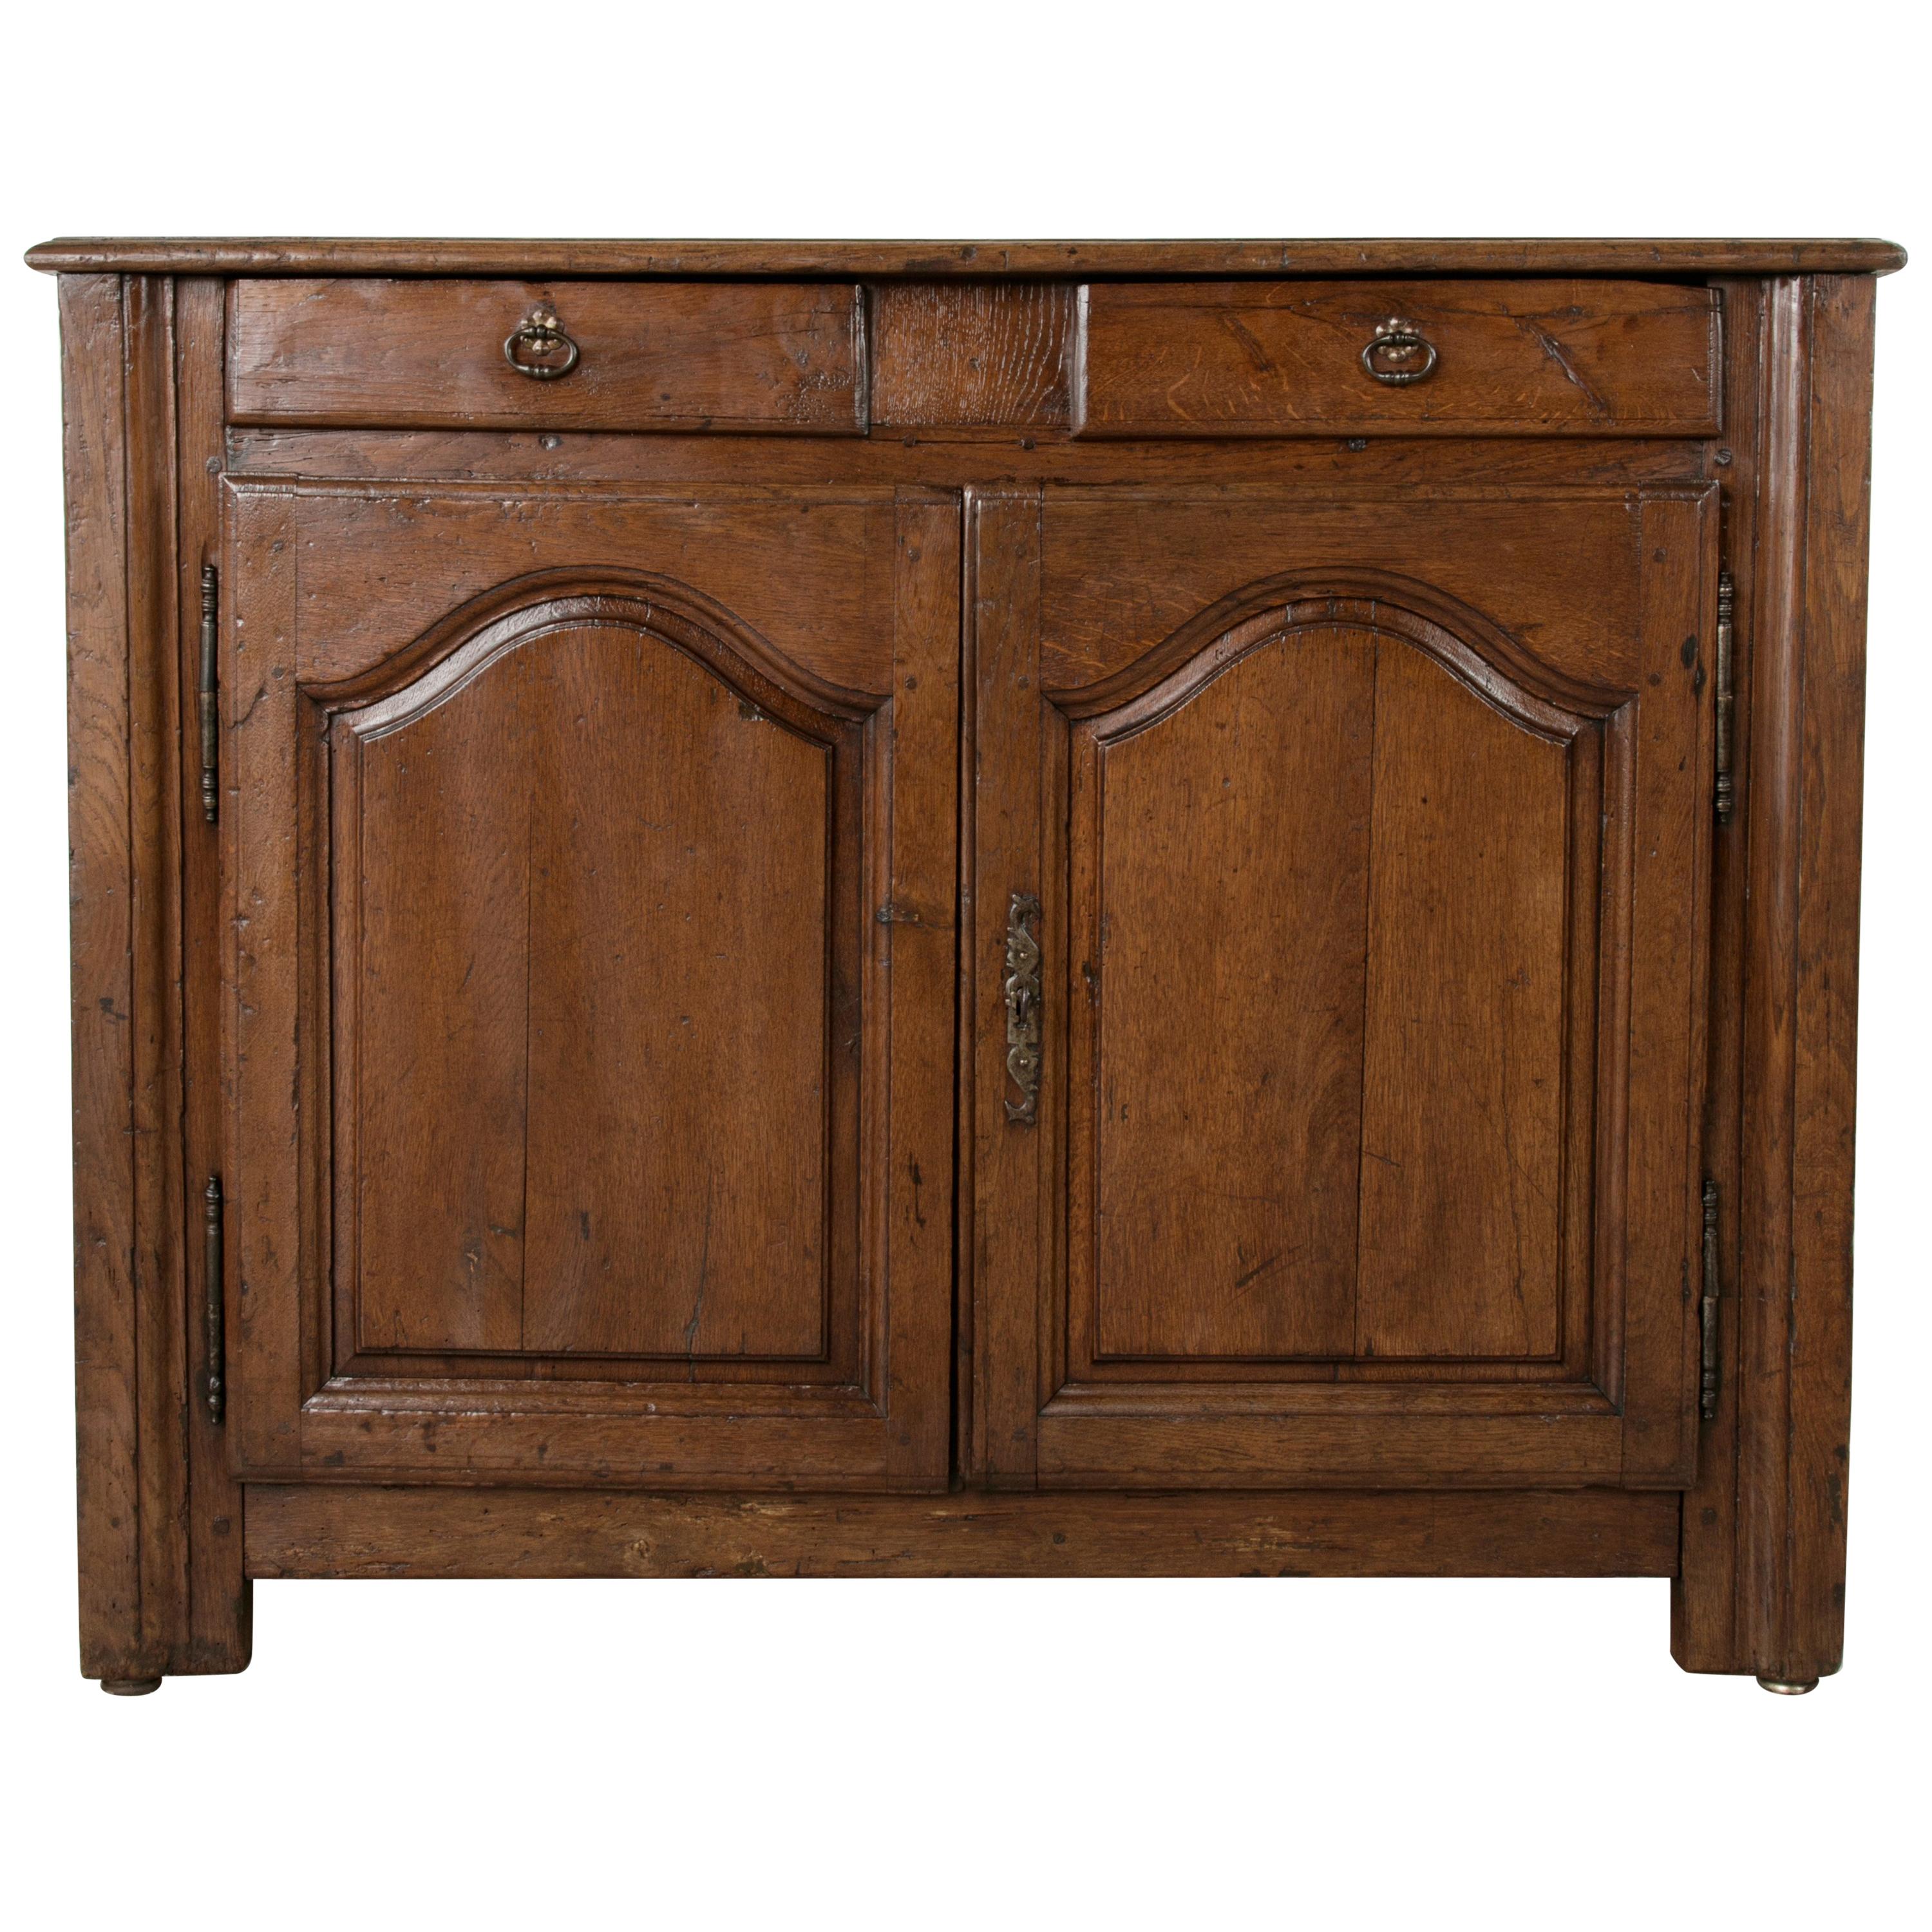 Mid-19th Century French Louis XIV Style Artisan-Made Oak Buffet or Sideboard